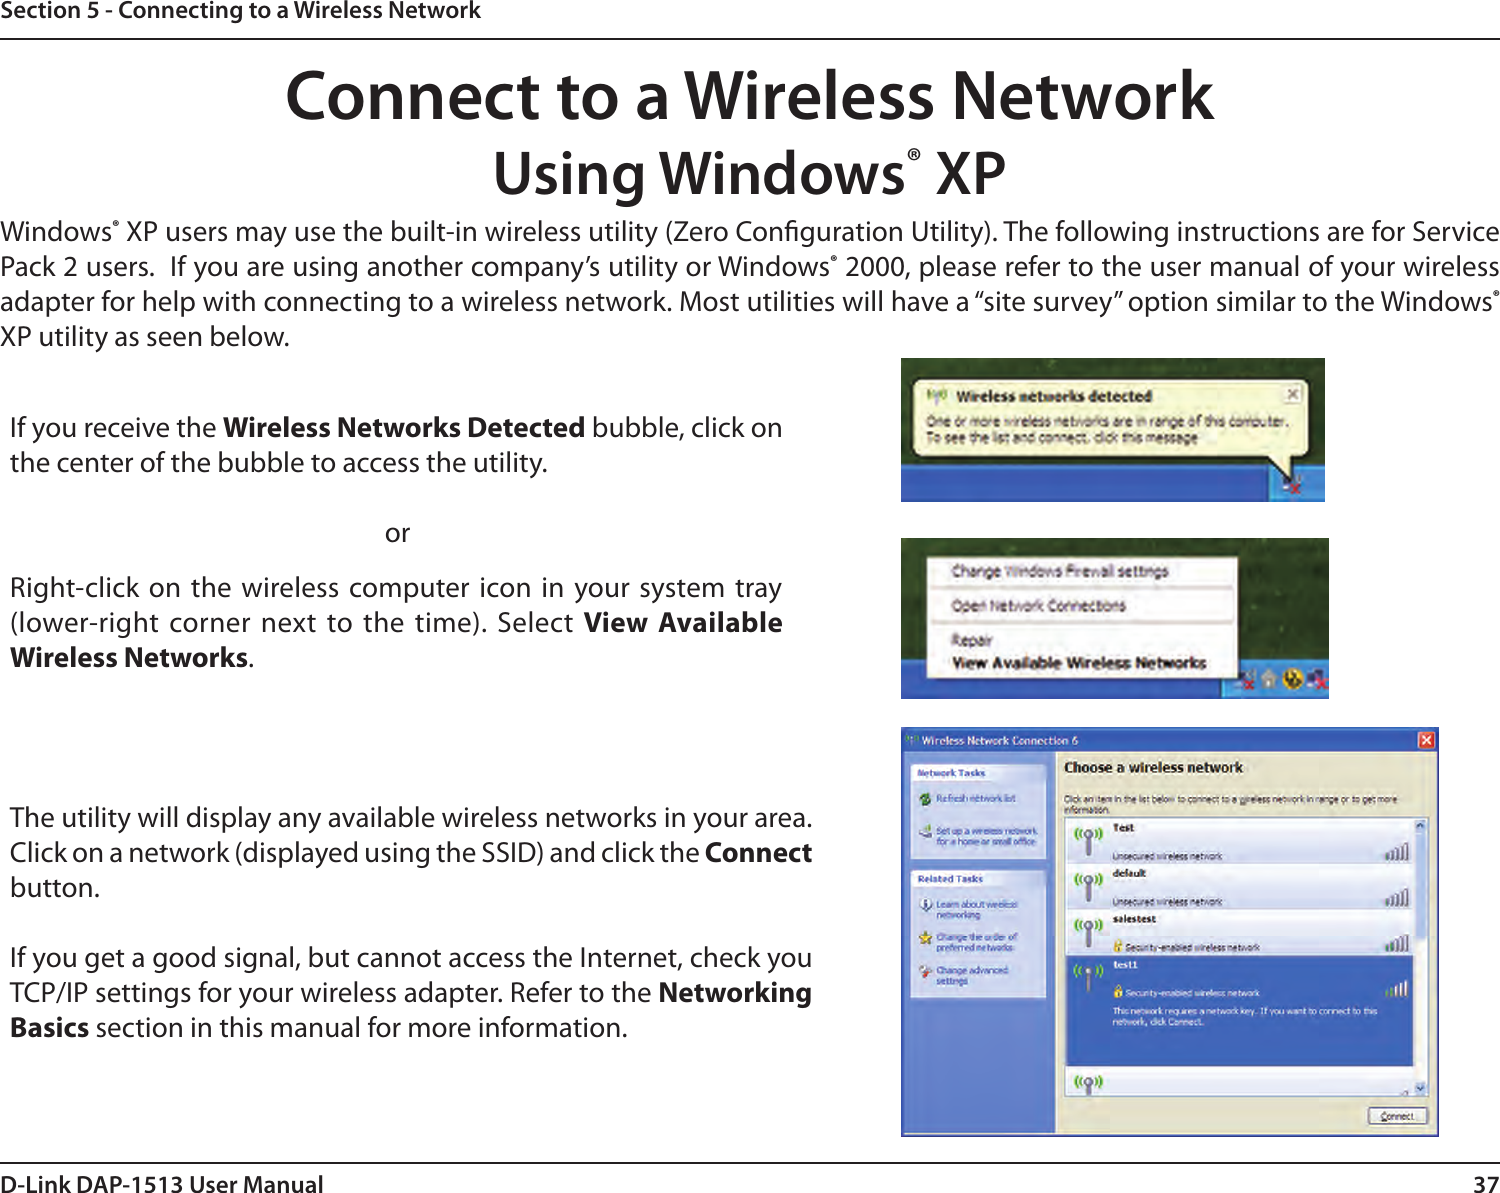 37D-Link DAP-1513 User ManualSection 5 - Connecting to a Wireless NetworkConnect to a Wireless NetworkUsing Windows® XPWindows® XP users may use the built-in wireless utility (Zero Conguration Utility). The following instructions are for Service Pack 2 users.  If you are using another company’s utility or Windows® 2000, please refer to the user manual of your wireless adapter for help with connecting to a wireless network. Most utilities will have a “site survey” option similar to the Windows® XP utility as seen below.Right-click on the wireless computer icon in your system tray (lower-right corner next to the time). Select View Available Wireless Networks.If you receive the Wireless Networks Detected bubble, click on the center of the bubble to access the utility.     orThe utility will display any available wireless networks in your area. Click on a network (displayed using the SSID) and click the Connect button.If you get a good signal, but cannot access the Internet, check you TCP/IP settings for your wireless adapter. Refer to the Networking Basics section in this manual for more information.